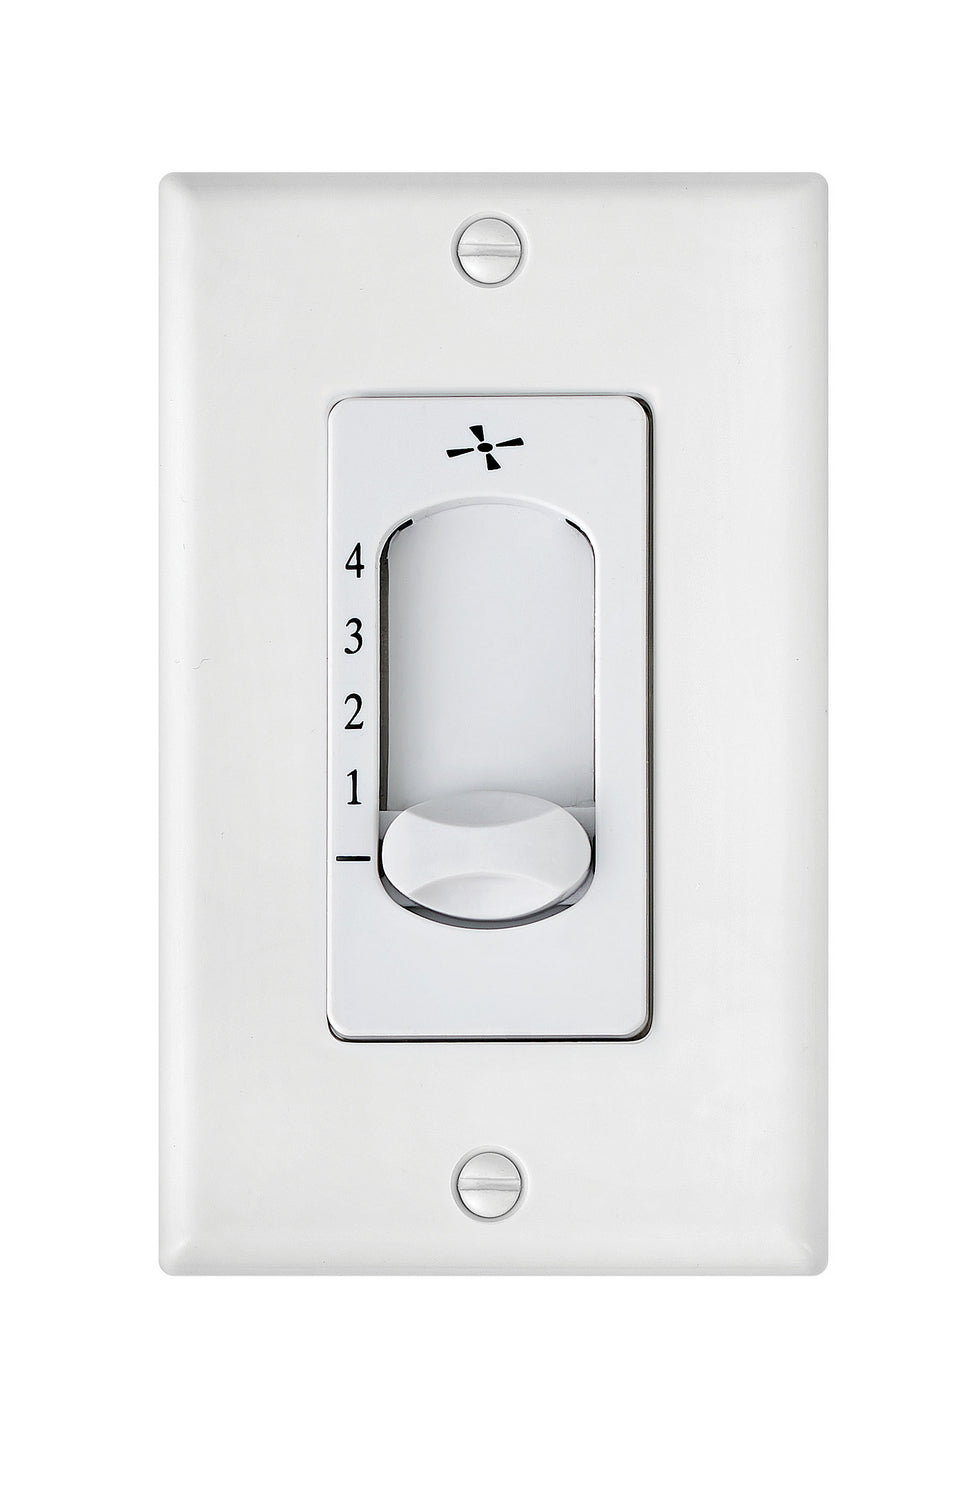 Hinkley - 980011FWH - Wall Contol - Wall Control 4 Speed Slide - White